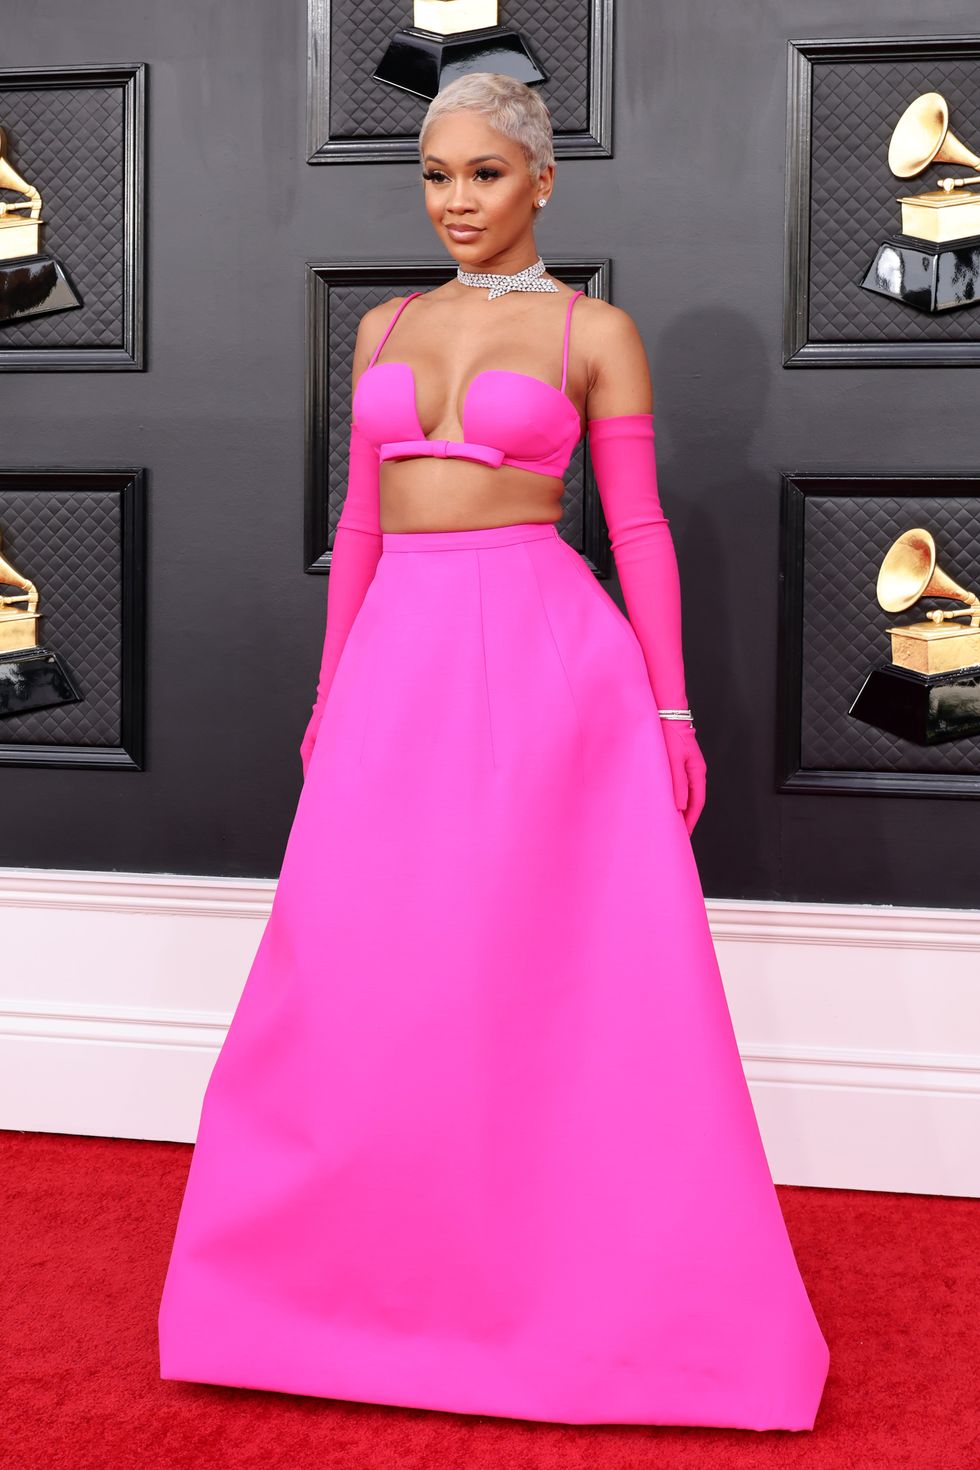 2022 Grammys Red Carpet Fashion: The Best Looks